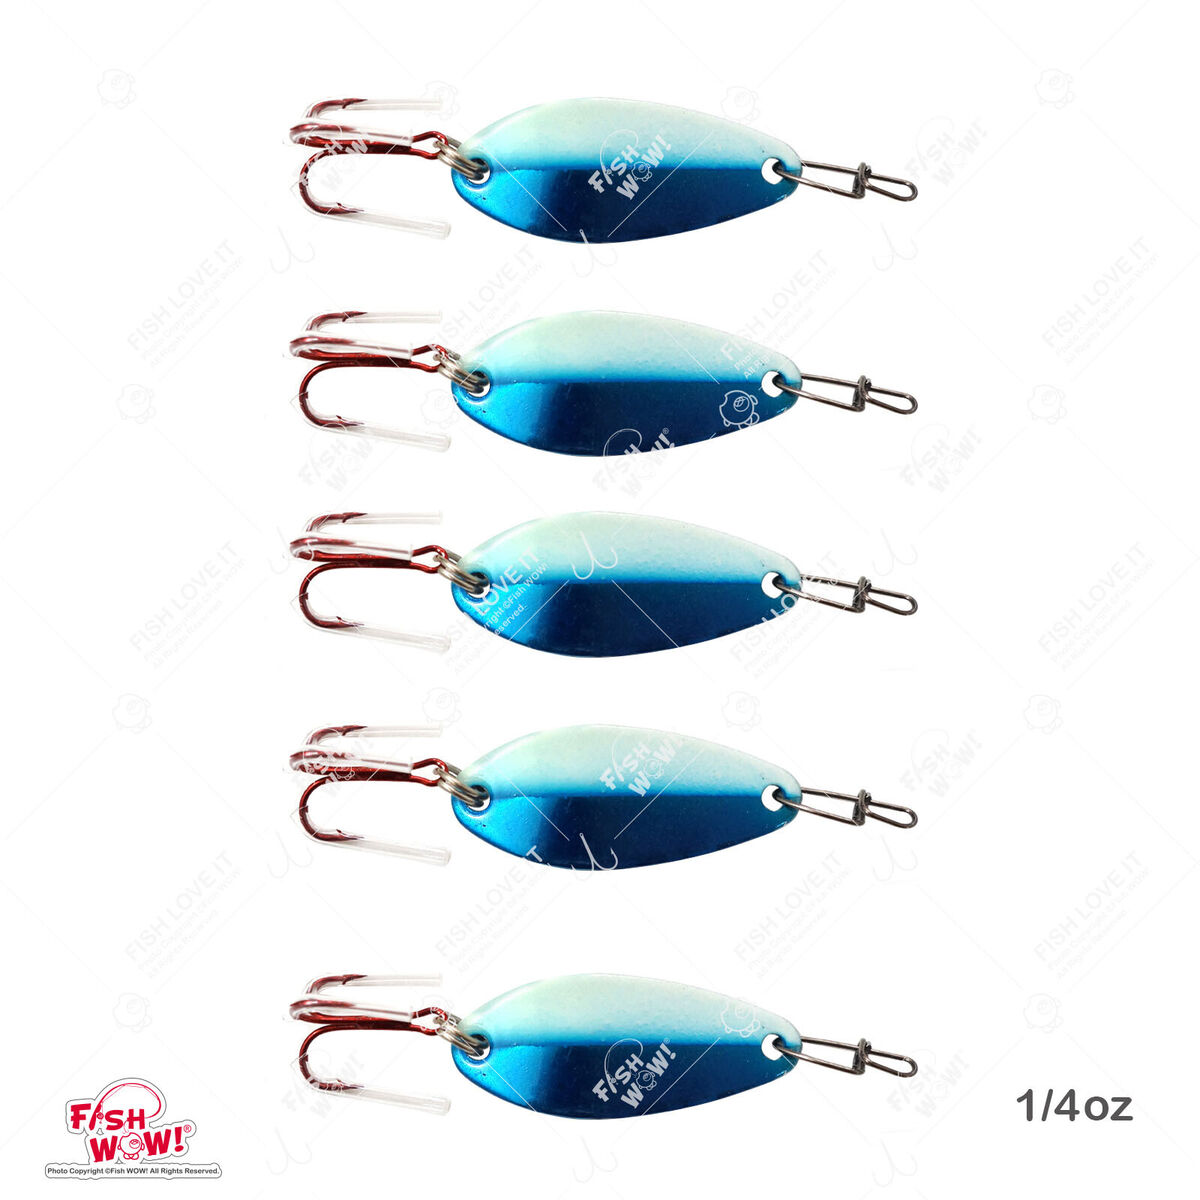 5pcs 1/4oz Fish WOW! Fishing Spoon w/ a Treble Red Hook and Duo Lock Snap  Blue